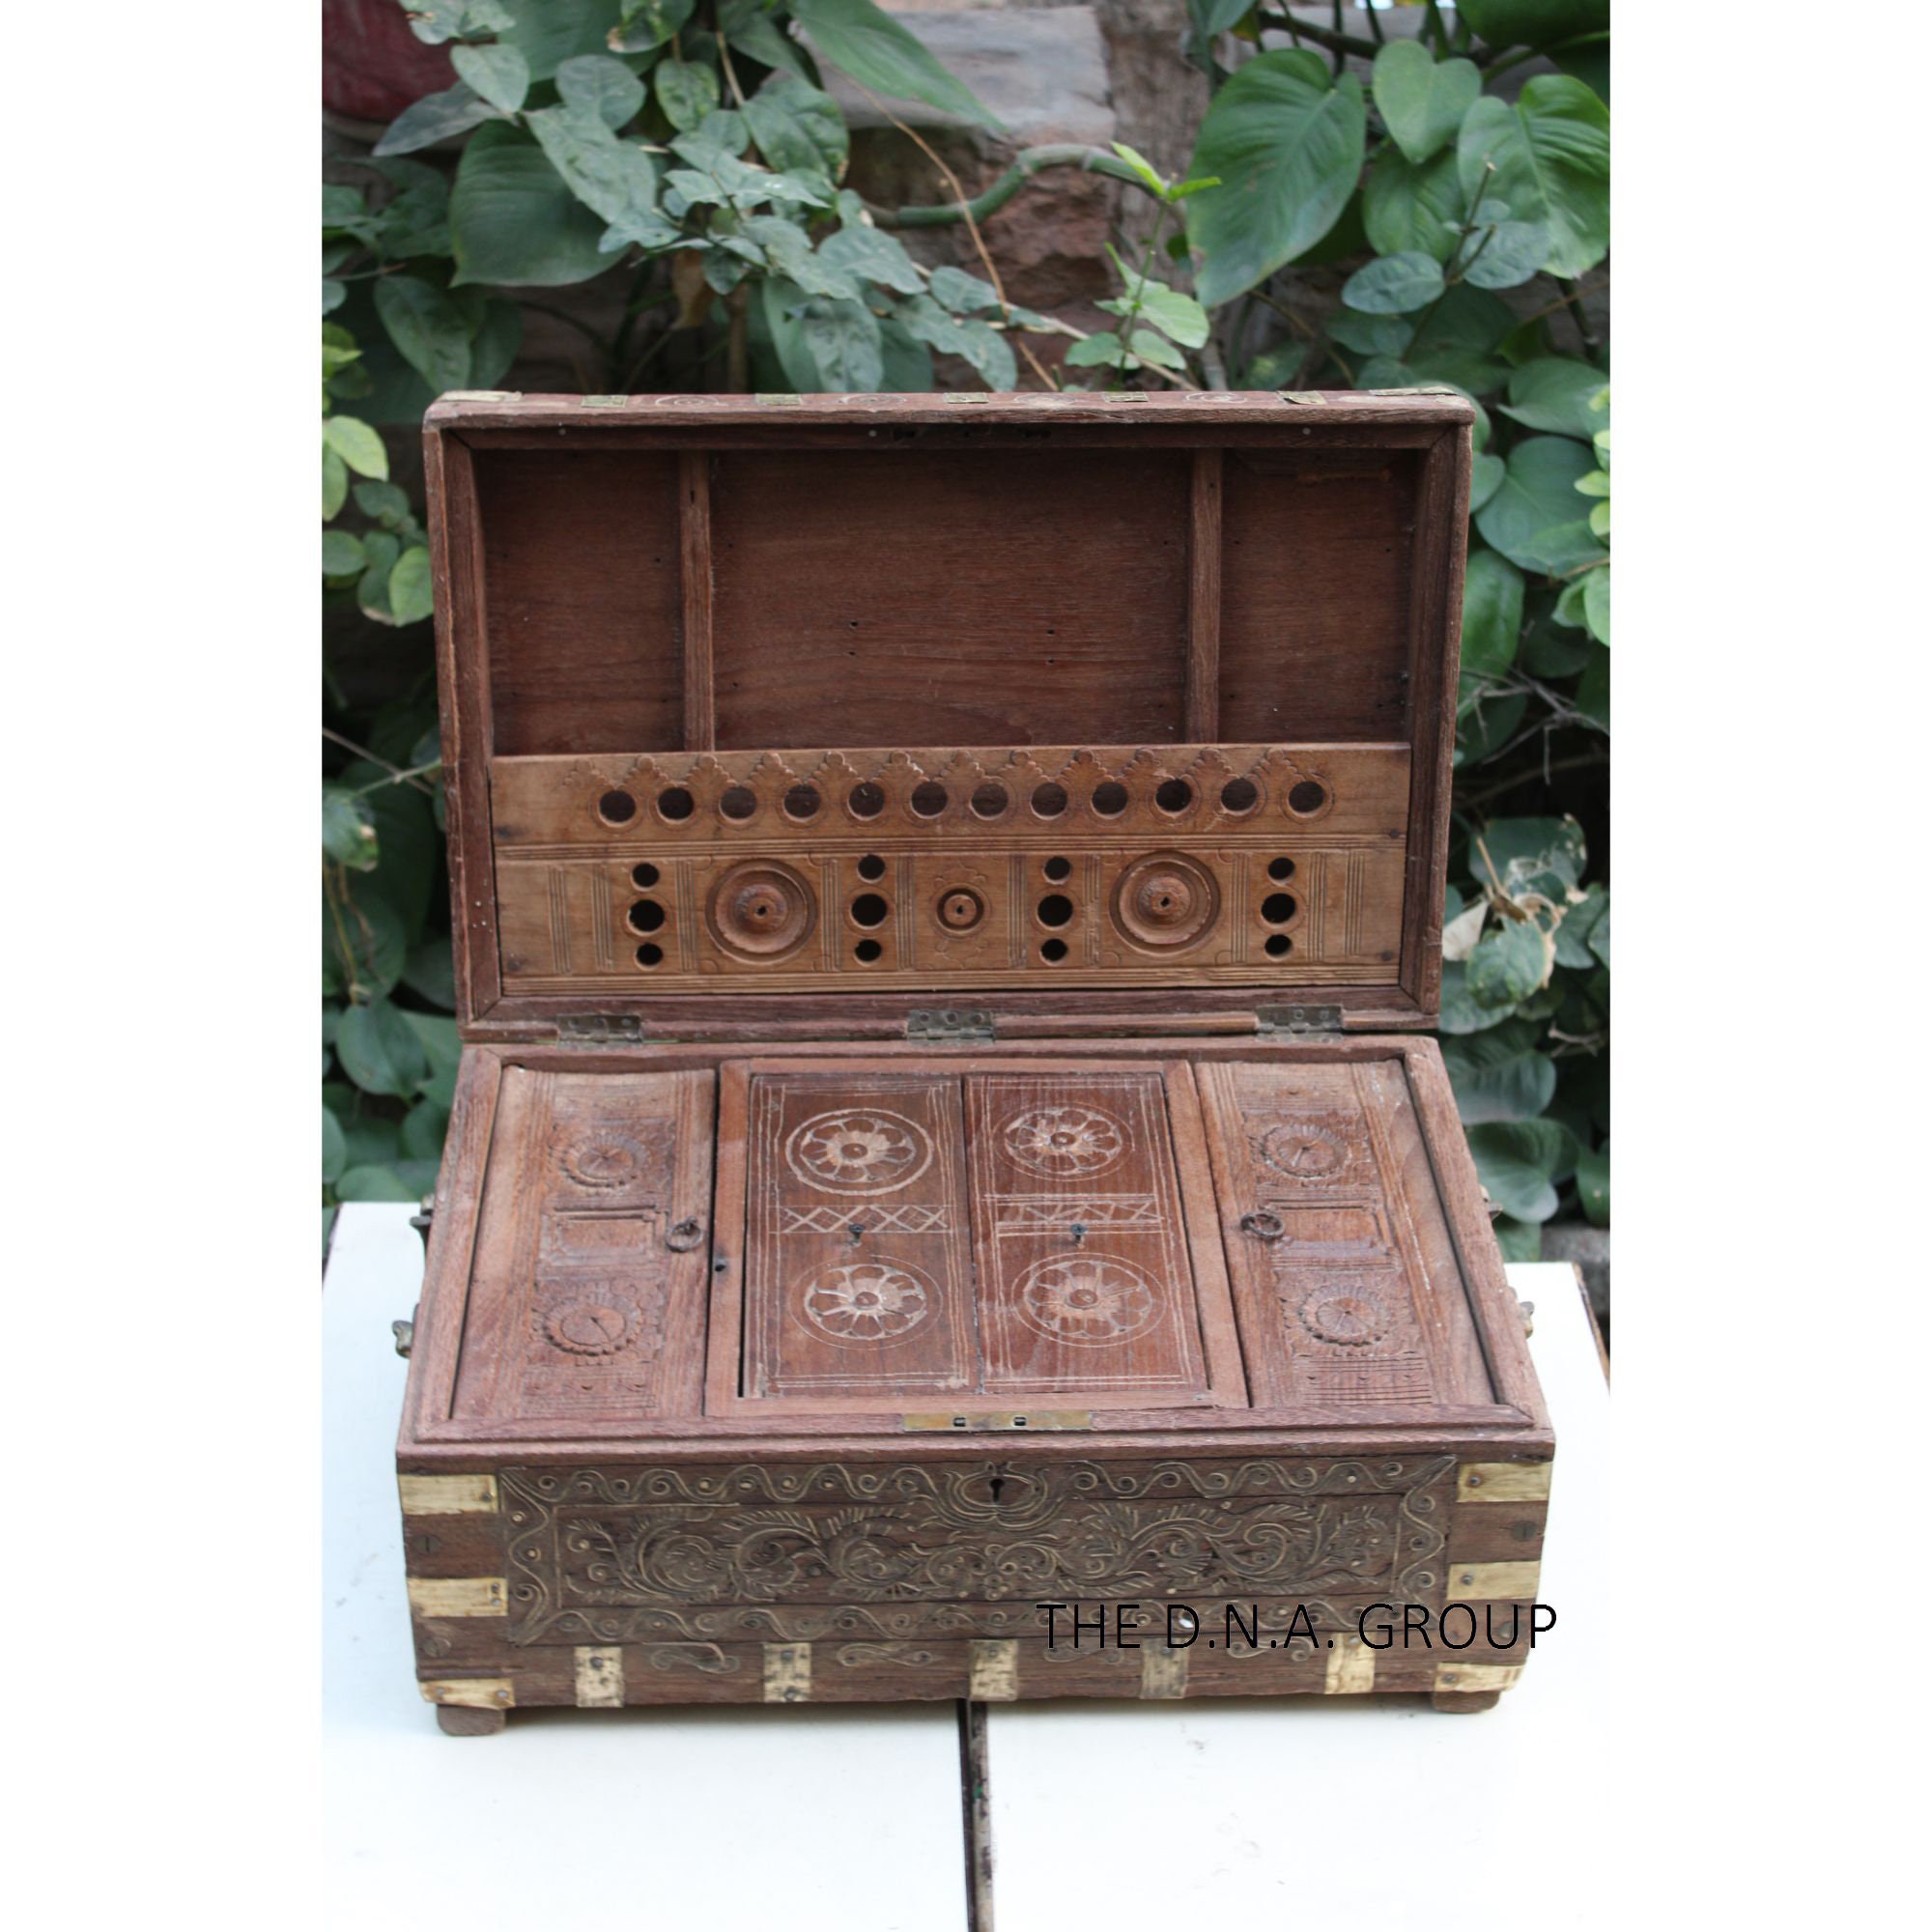 Wooden Jewelry Box With 3 Expandable Jewelry Boxes, Jewelry